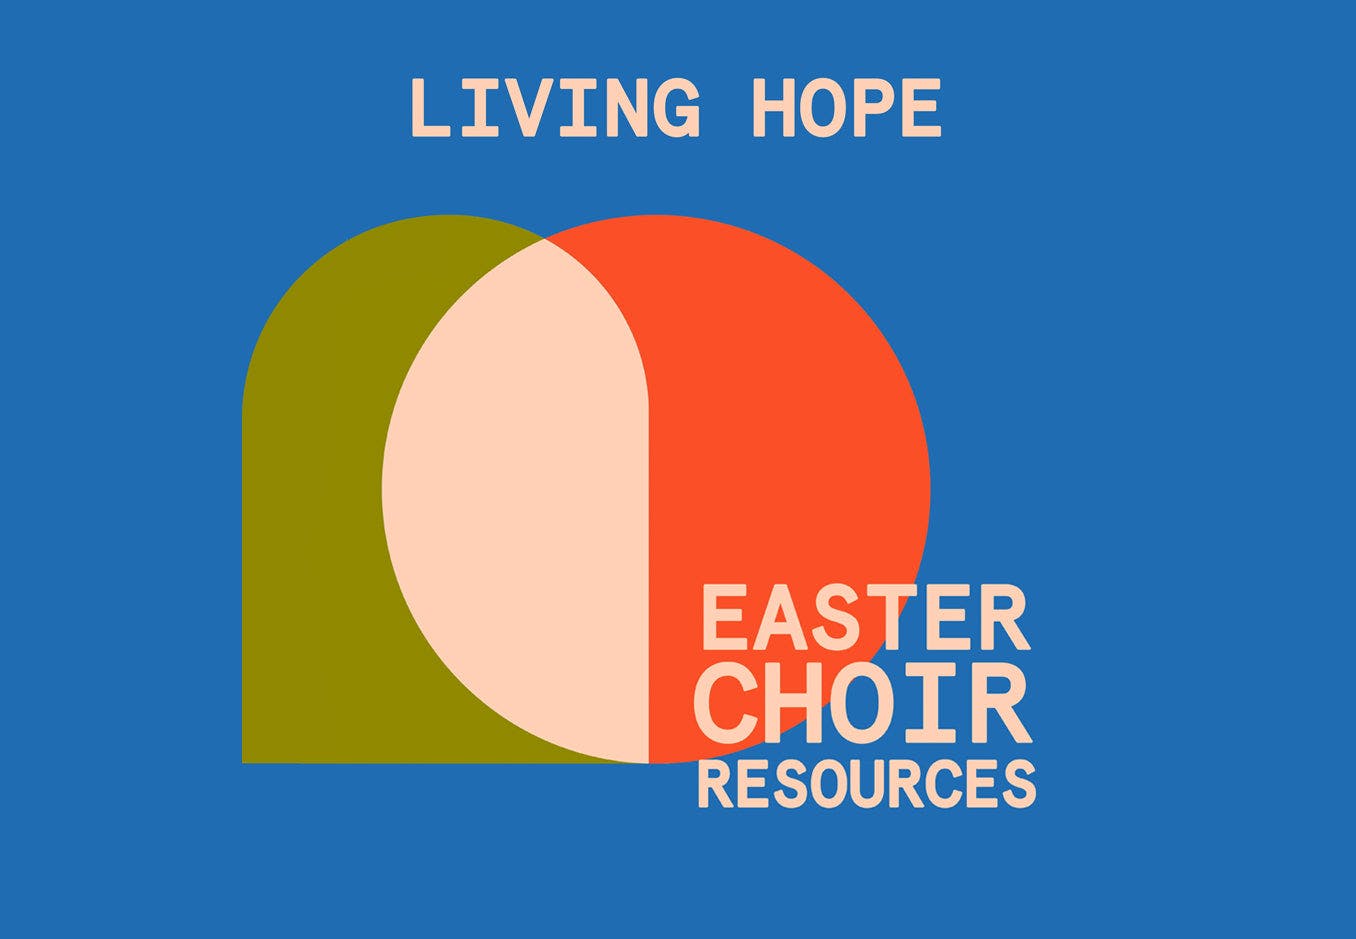 EASTER CHOIR RESOURCES - Living Hope